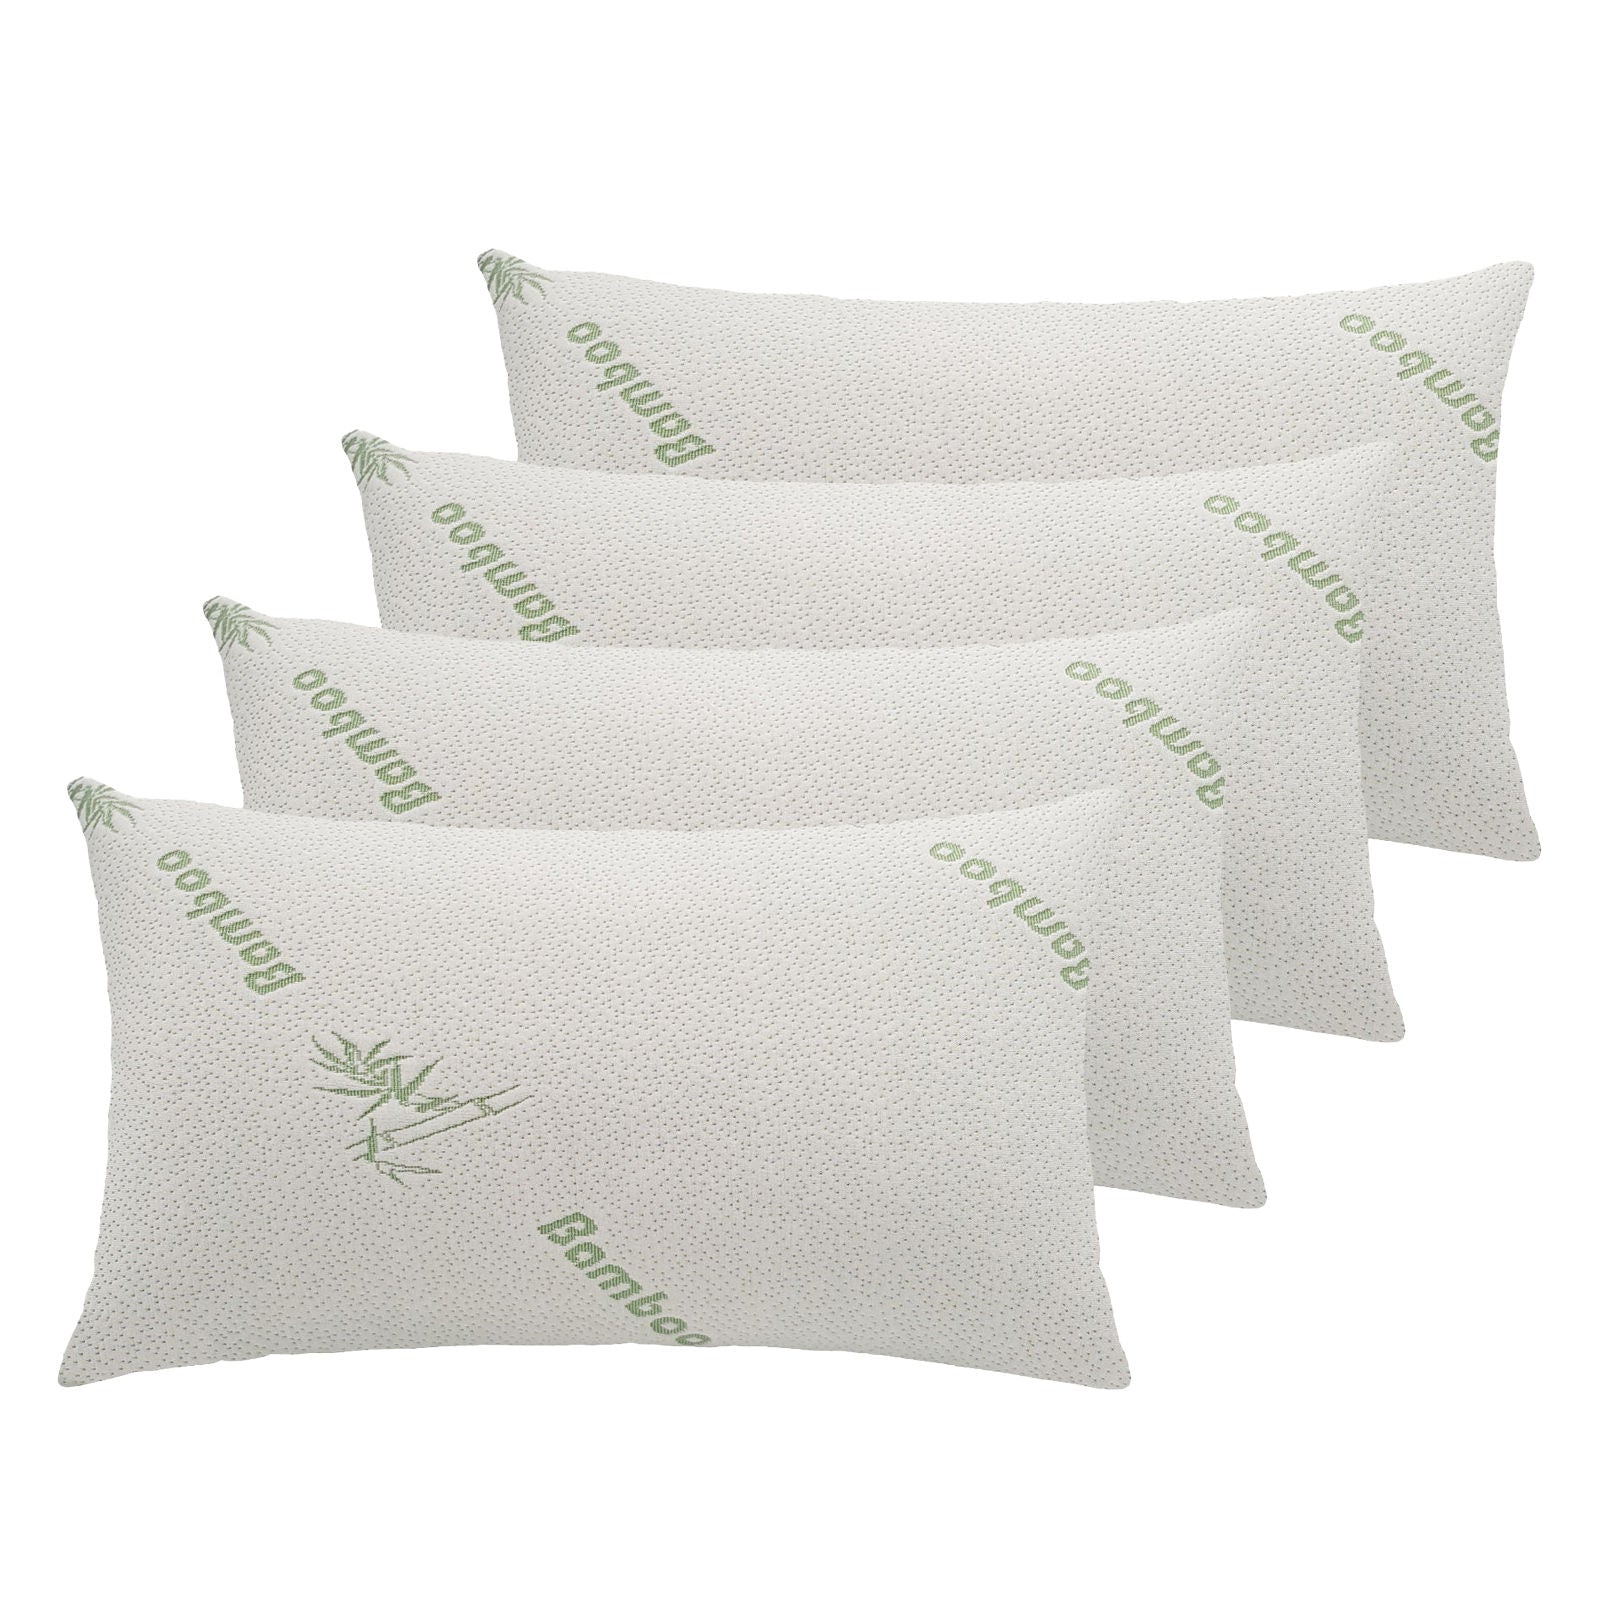 Royal Comfort Large Bamboo Blend Memory Foam Pillows 45 x 75cm 4 Pack-Bedding-PEROZ Accessories